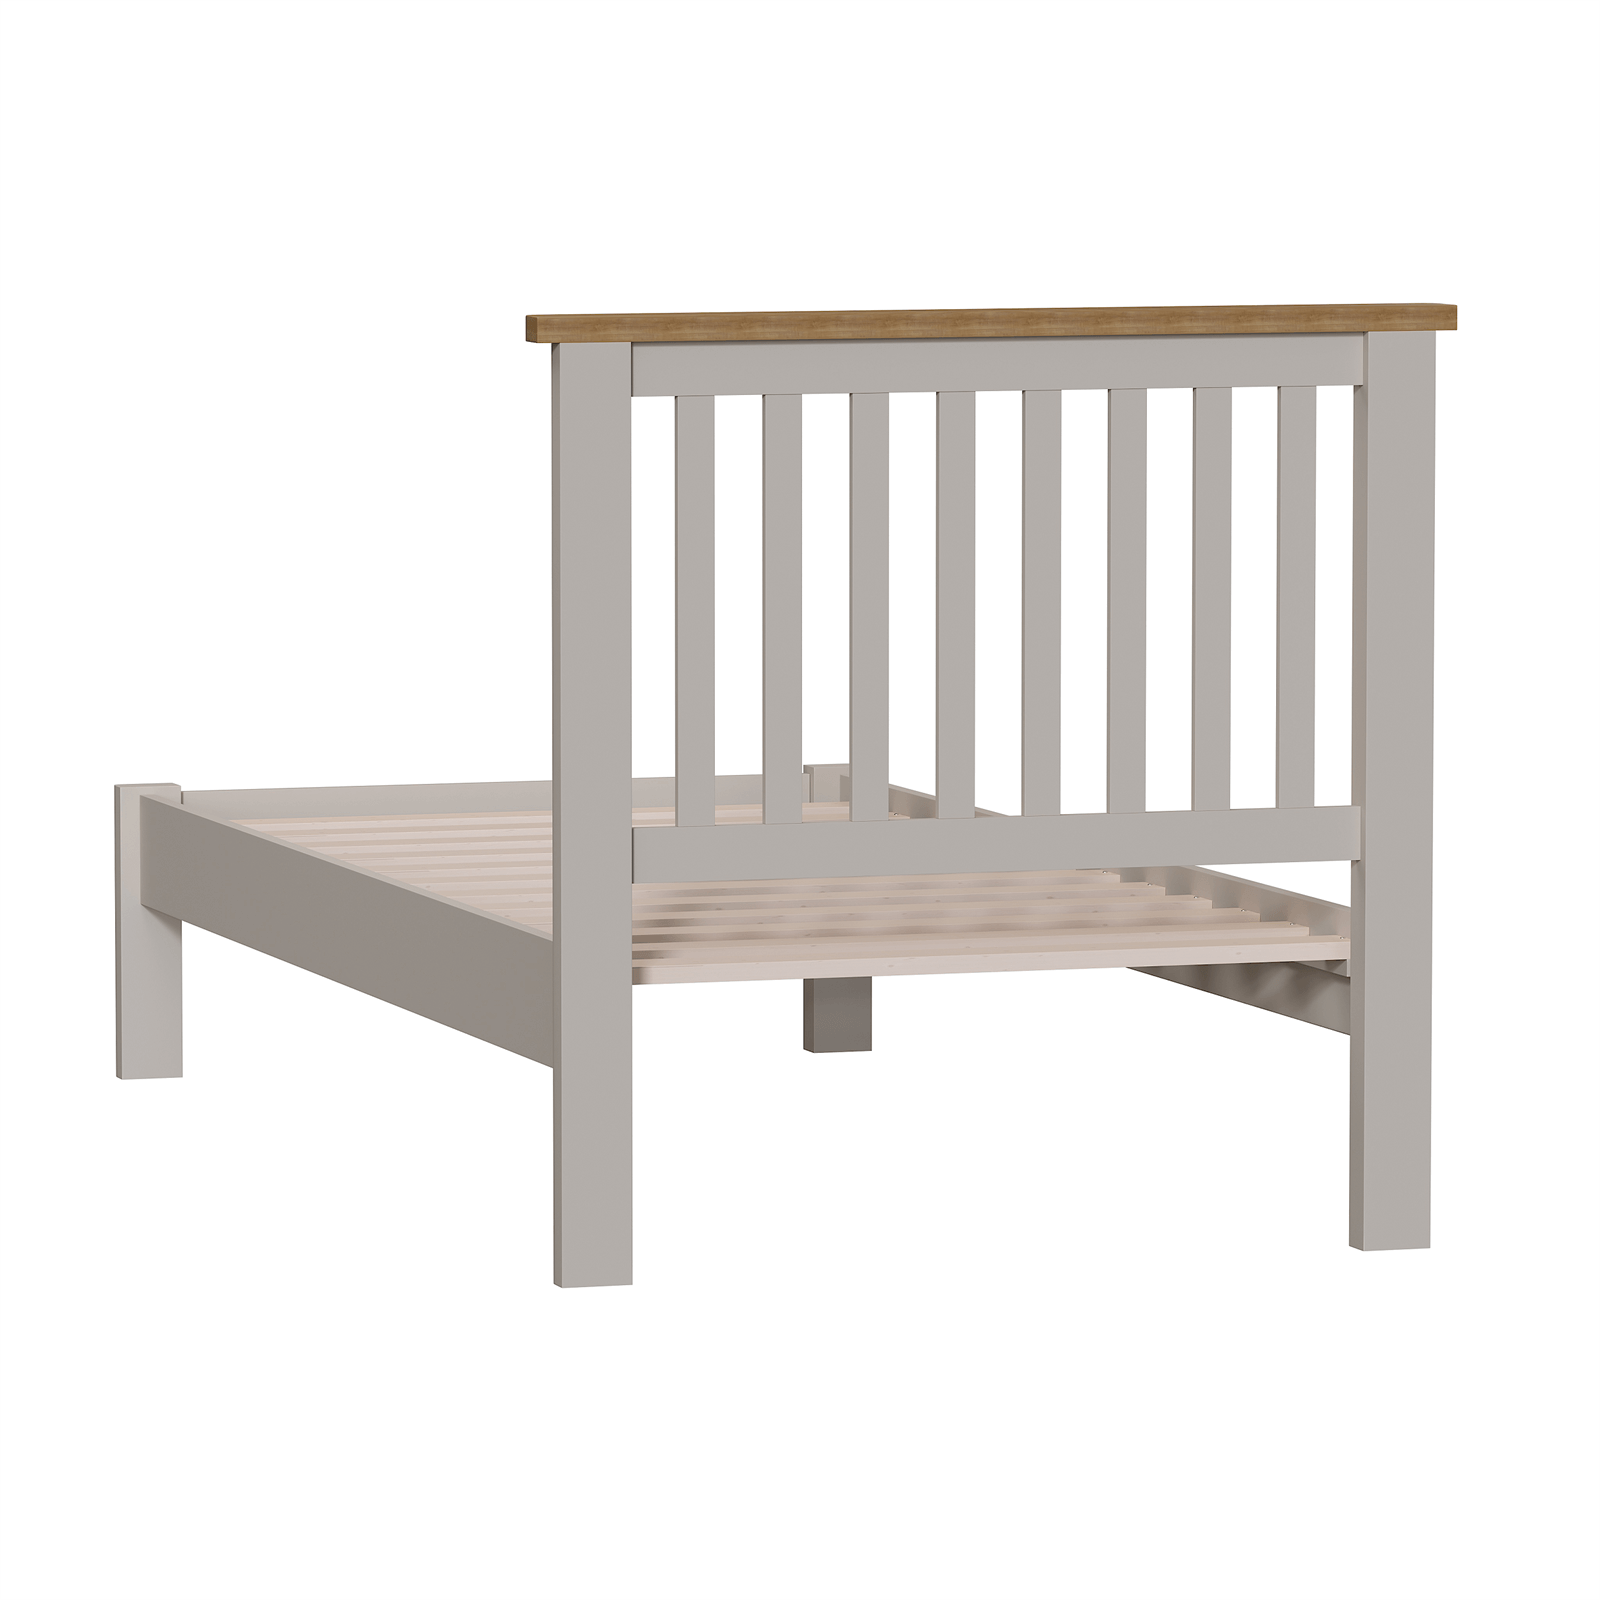 Padstow Single Bed Frame - Truffle